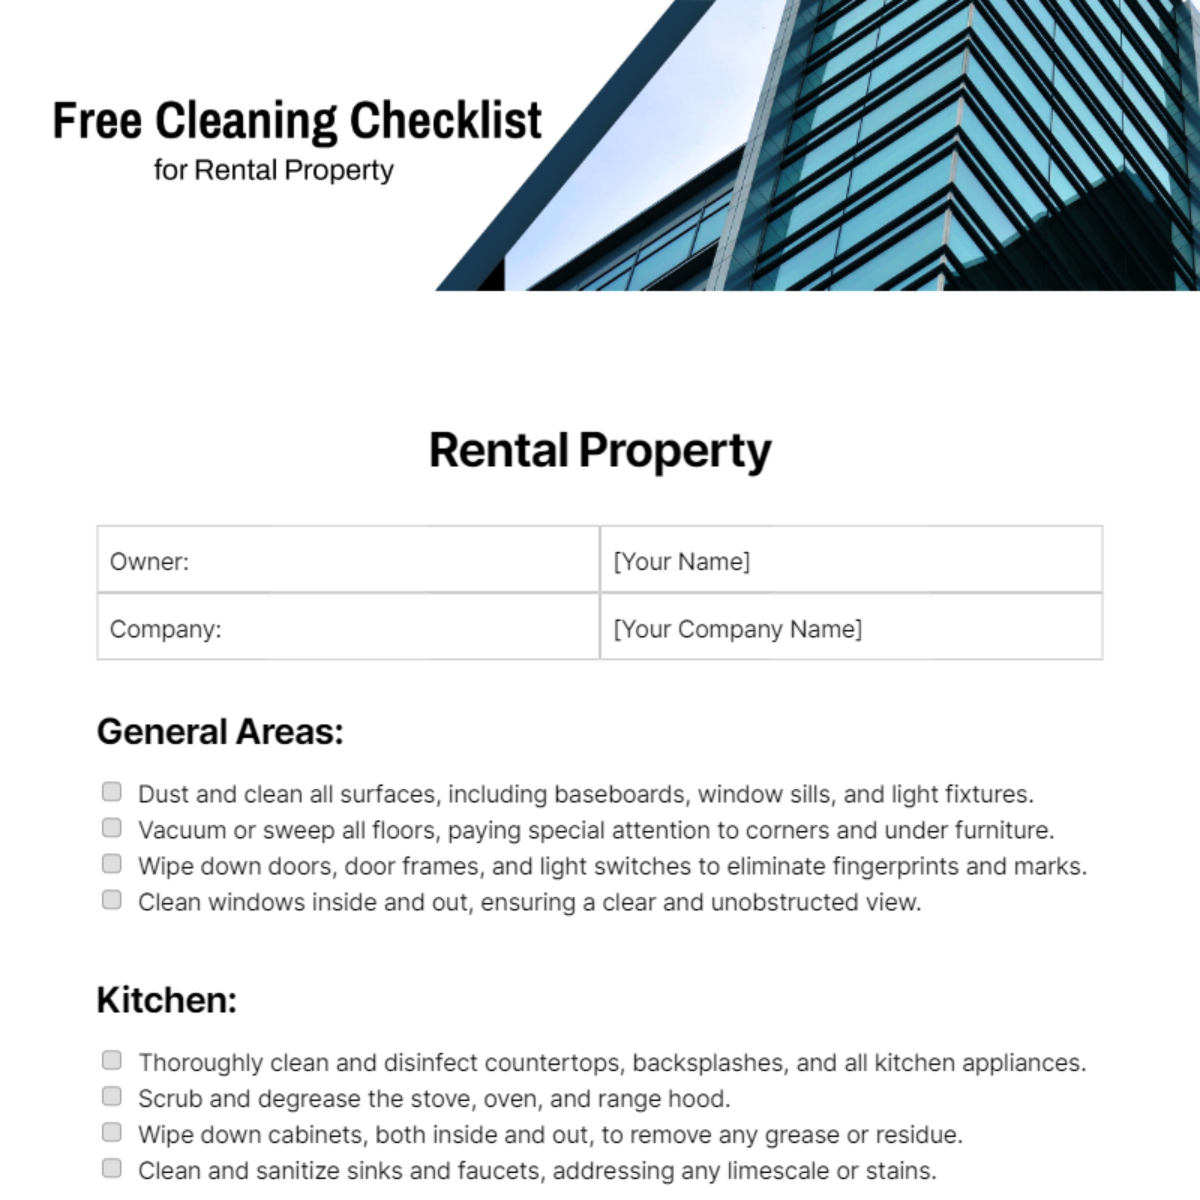 Free Cleaning Checklist For Rental Property Template